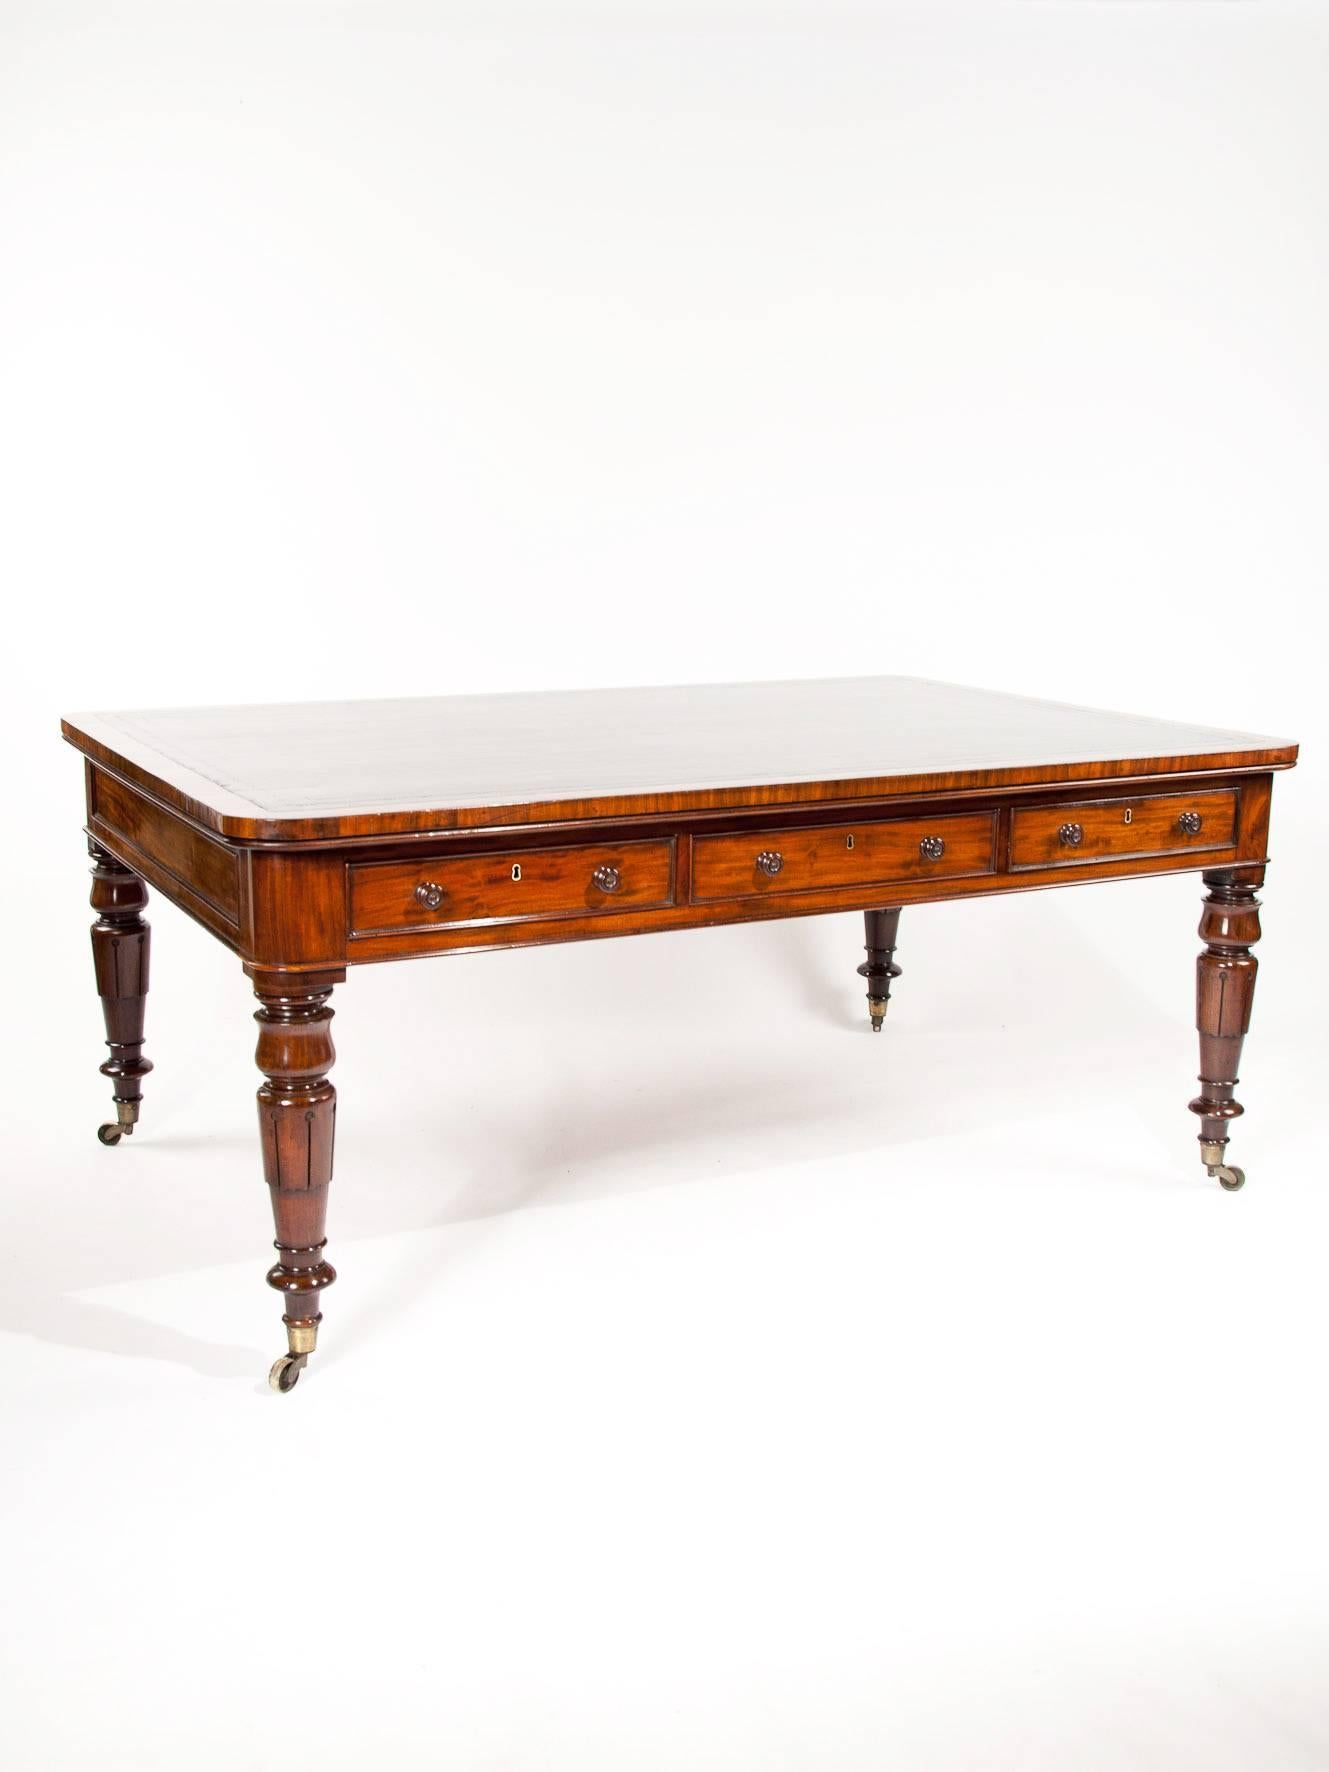 A superb quality antique mahogany partners library / writing table desk dating to circa 1840.
This large antique partners library table has been constructed with the use of the finest mahogany timbers of its period which have mellowed to a